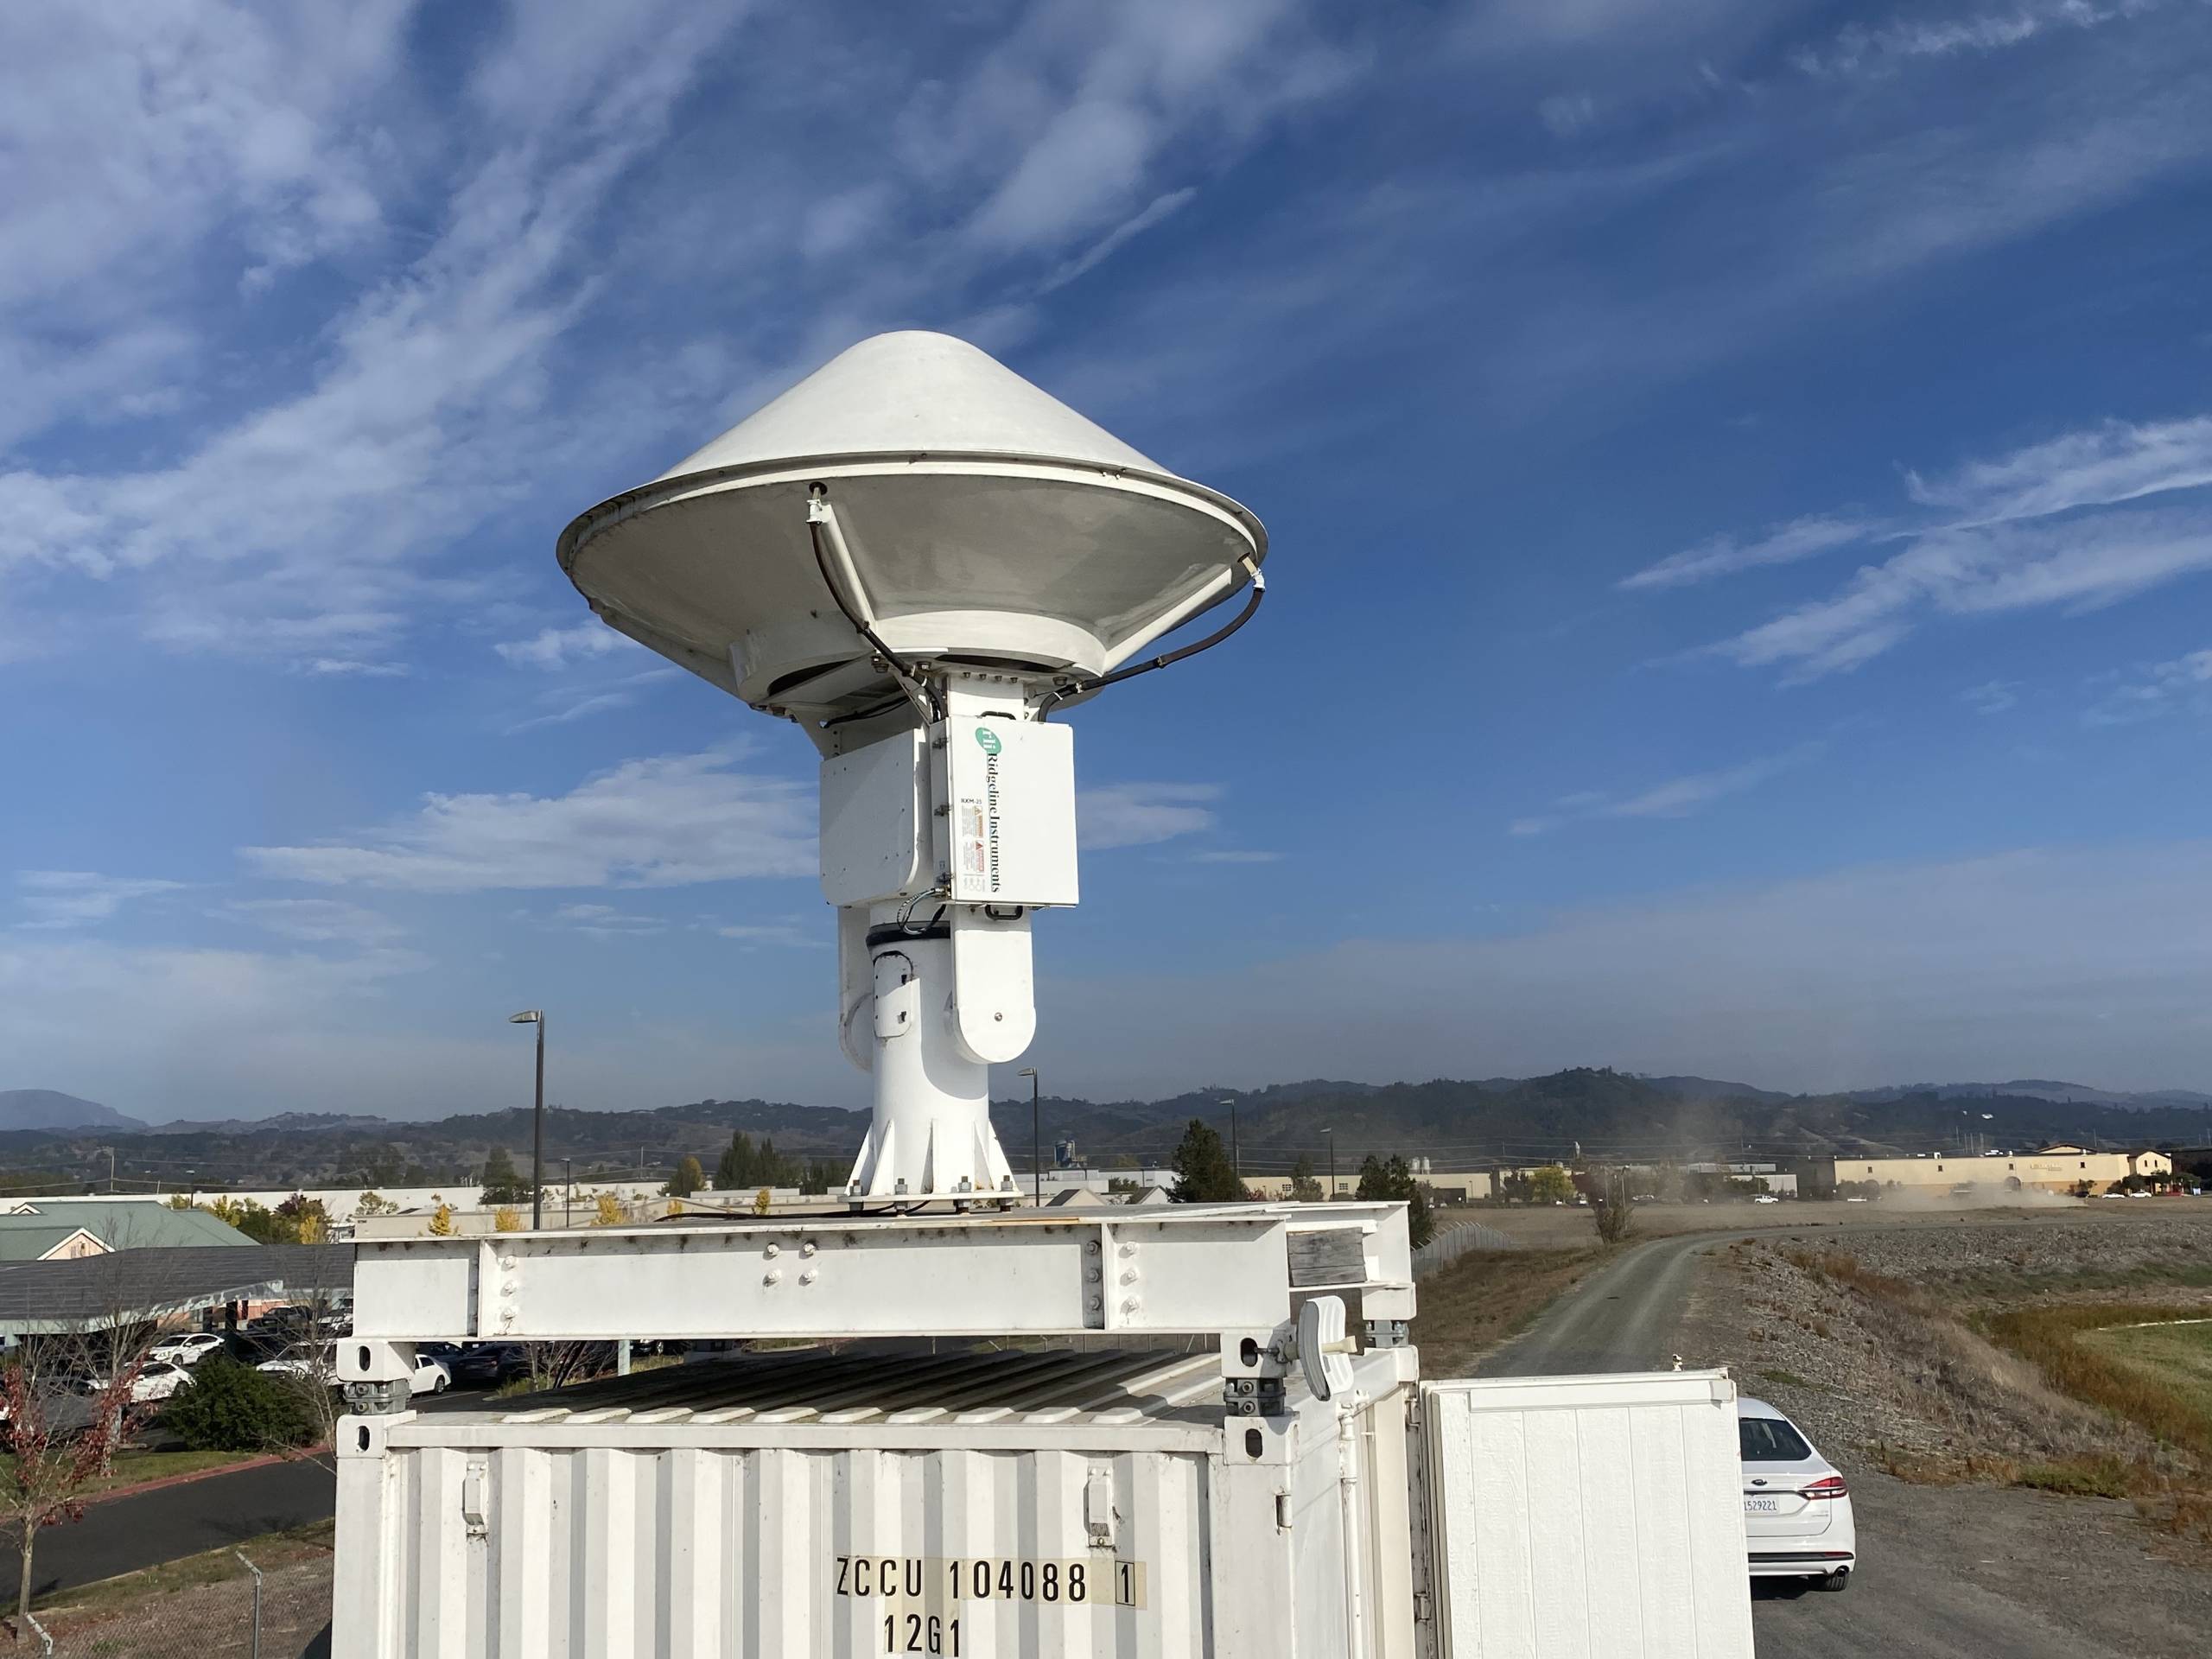 A white radar unit points toward the sky. It looks like a mix between a mushroom and a spaceship. A bright blue sky with wispy clouds is in the background.